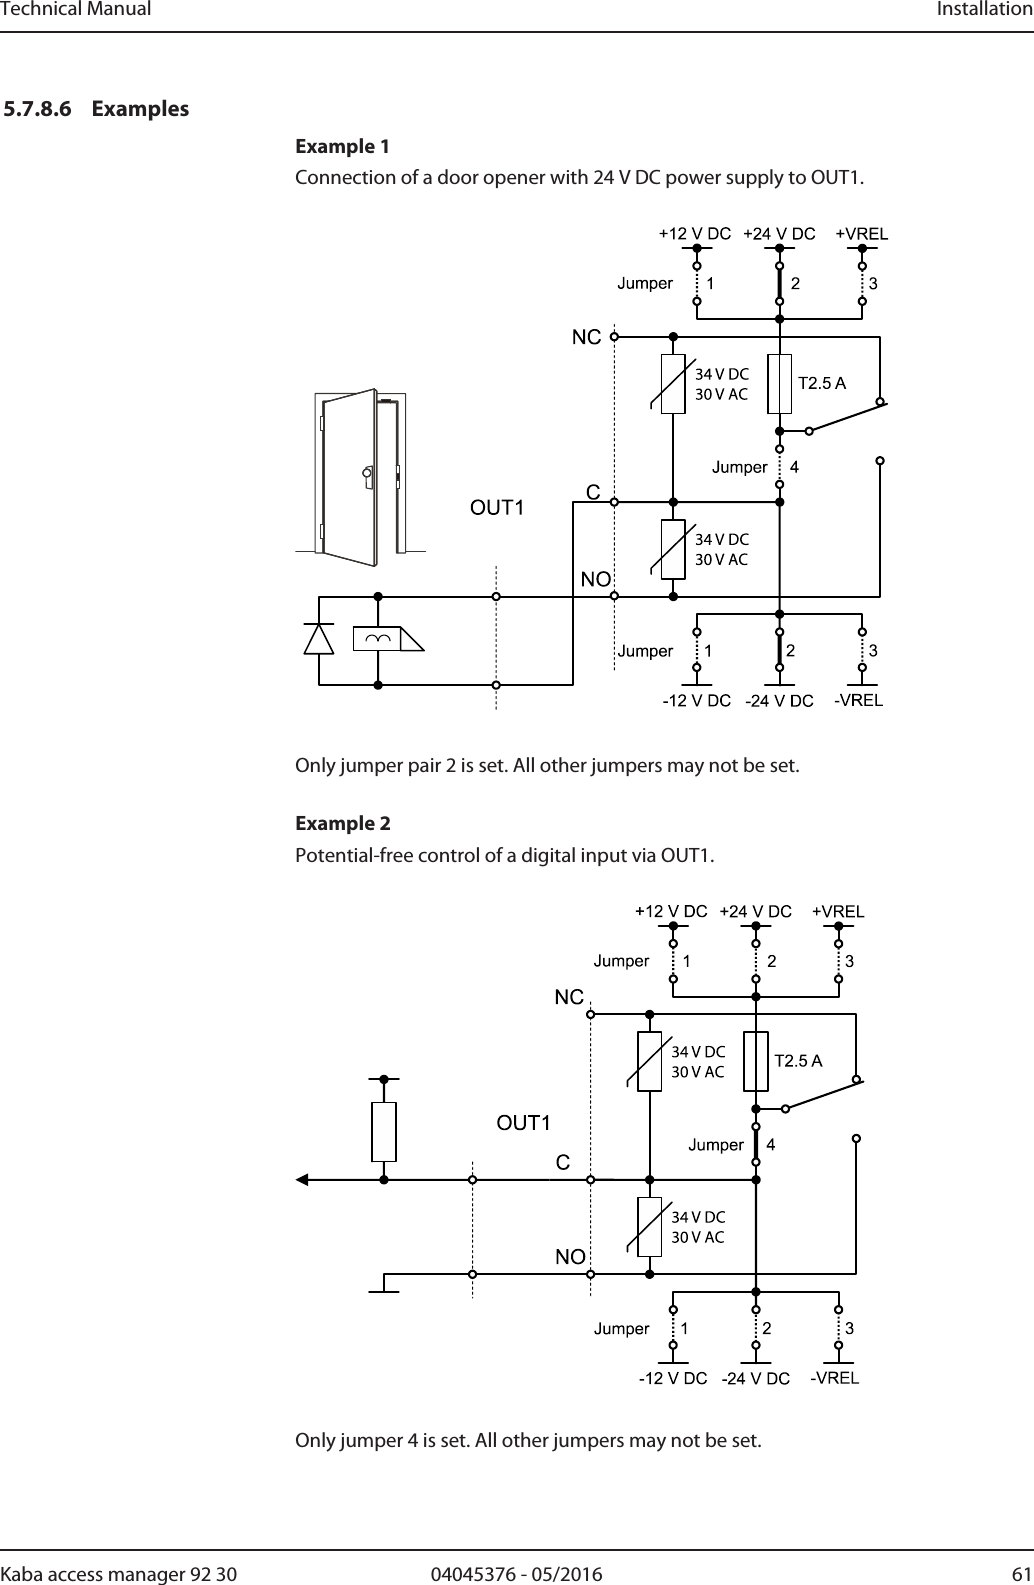 Technical Manual Installation6104045376 - 05/2016Kaba access manager 92 305.7.8.6 ExamplesExample 1Connection of a door opener with 24 V DC power supply to OUT1.Only jumper pair 2 is set. All other jumpers may not be set.Example 2Potential-free control of a digital input via OUT1.Only jumper 4 is set. All other jumpers may not be set.